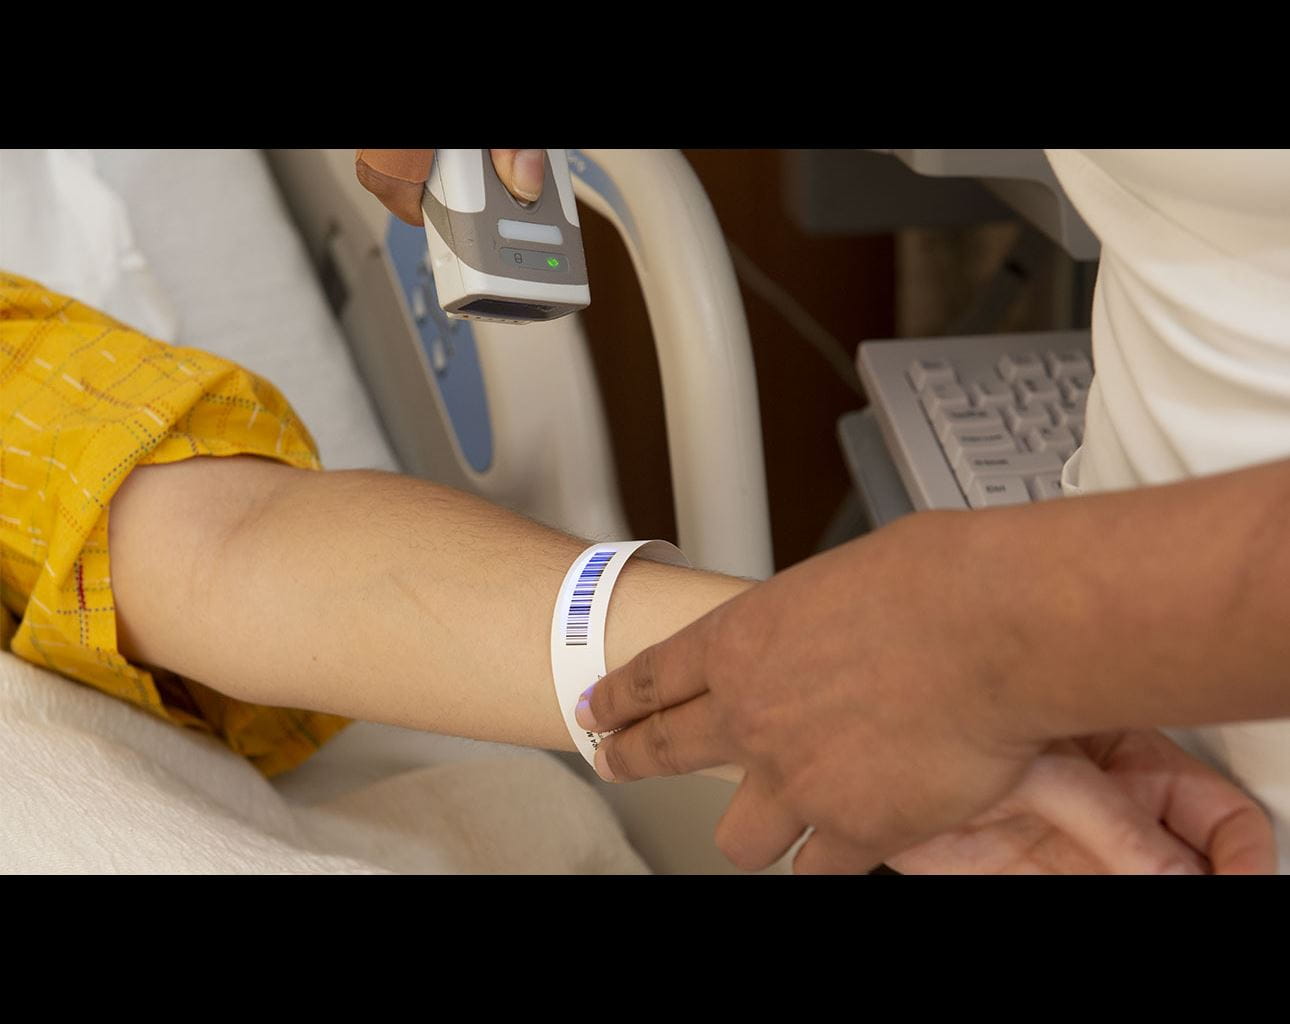 patient wrist band being scanned